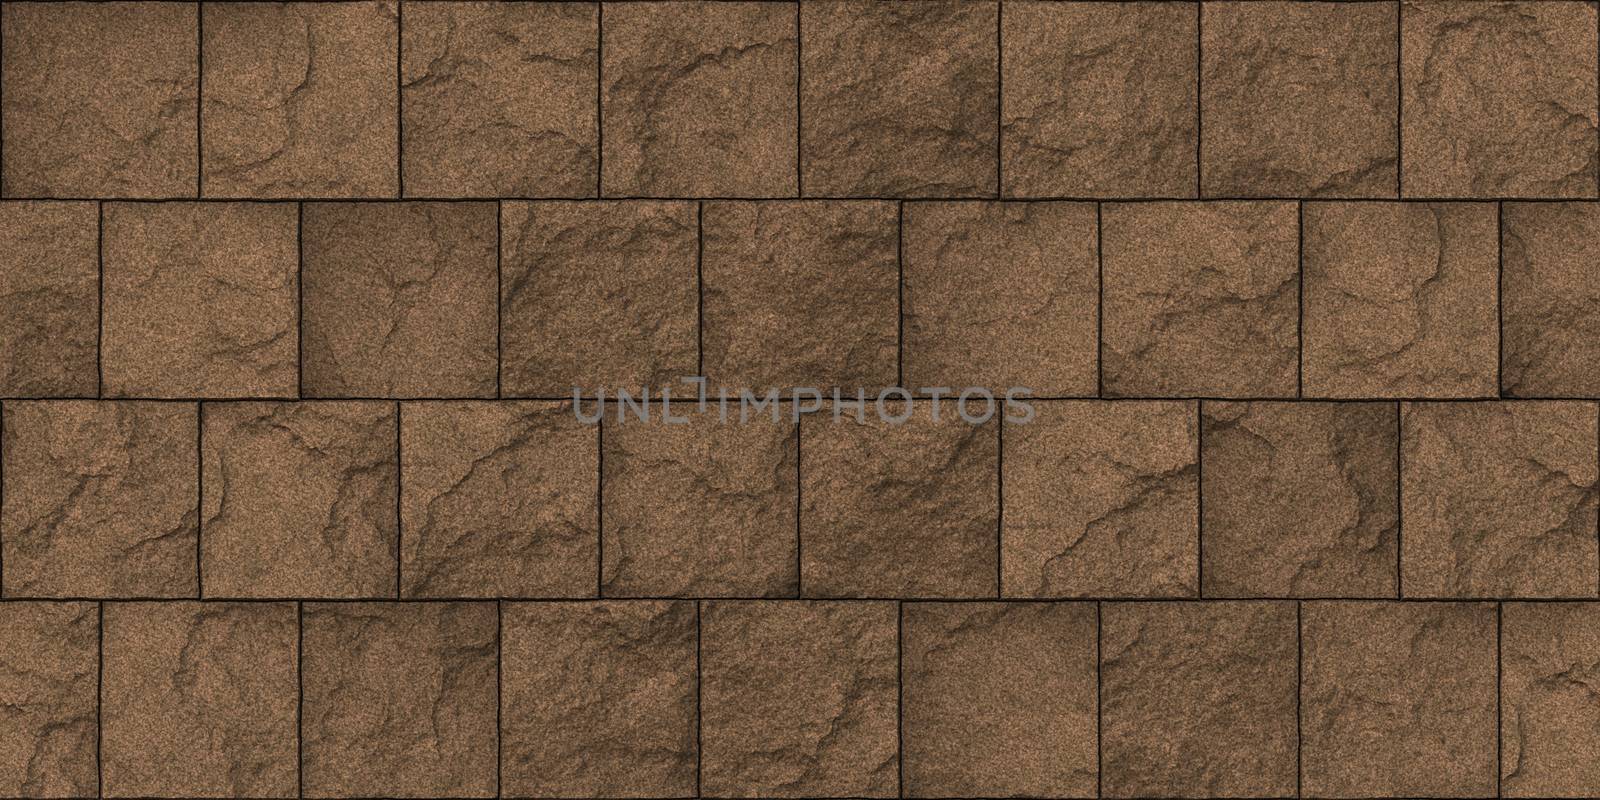 Beige Seamless Stone Block Wall Texture. Building Facade Background. Exterior Architecture Decorative House Facing. by sanches812